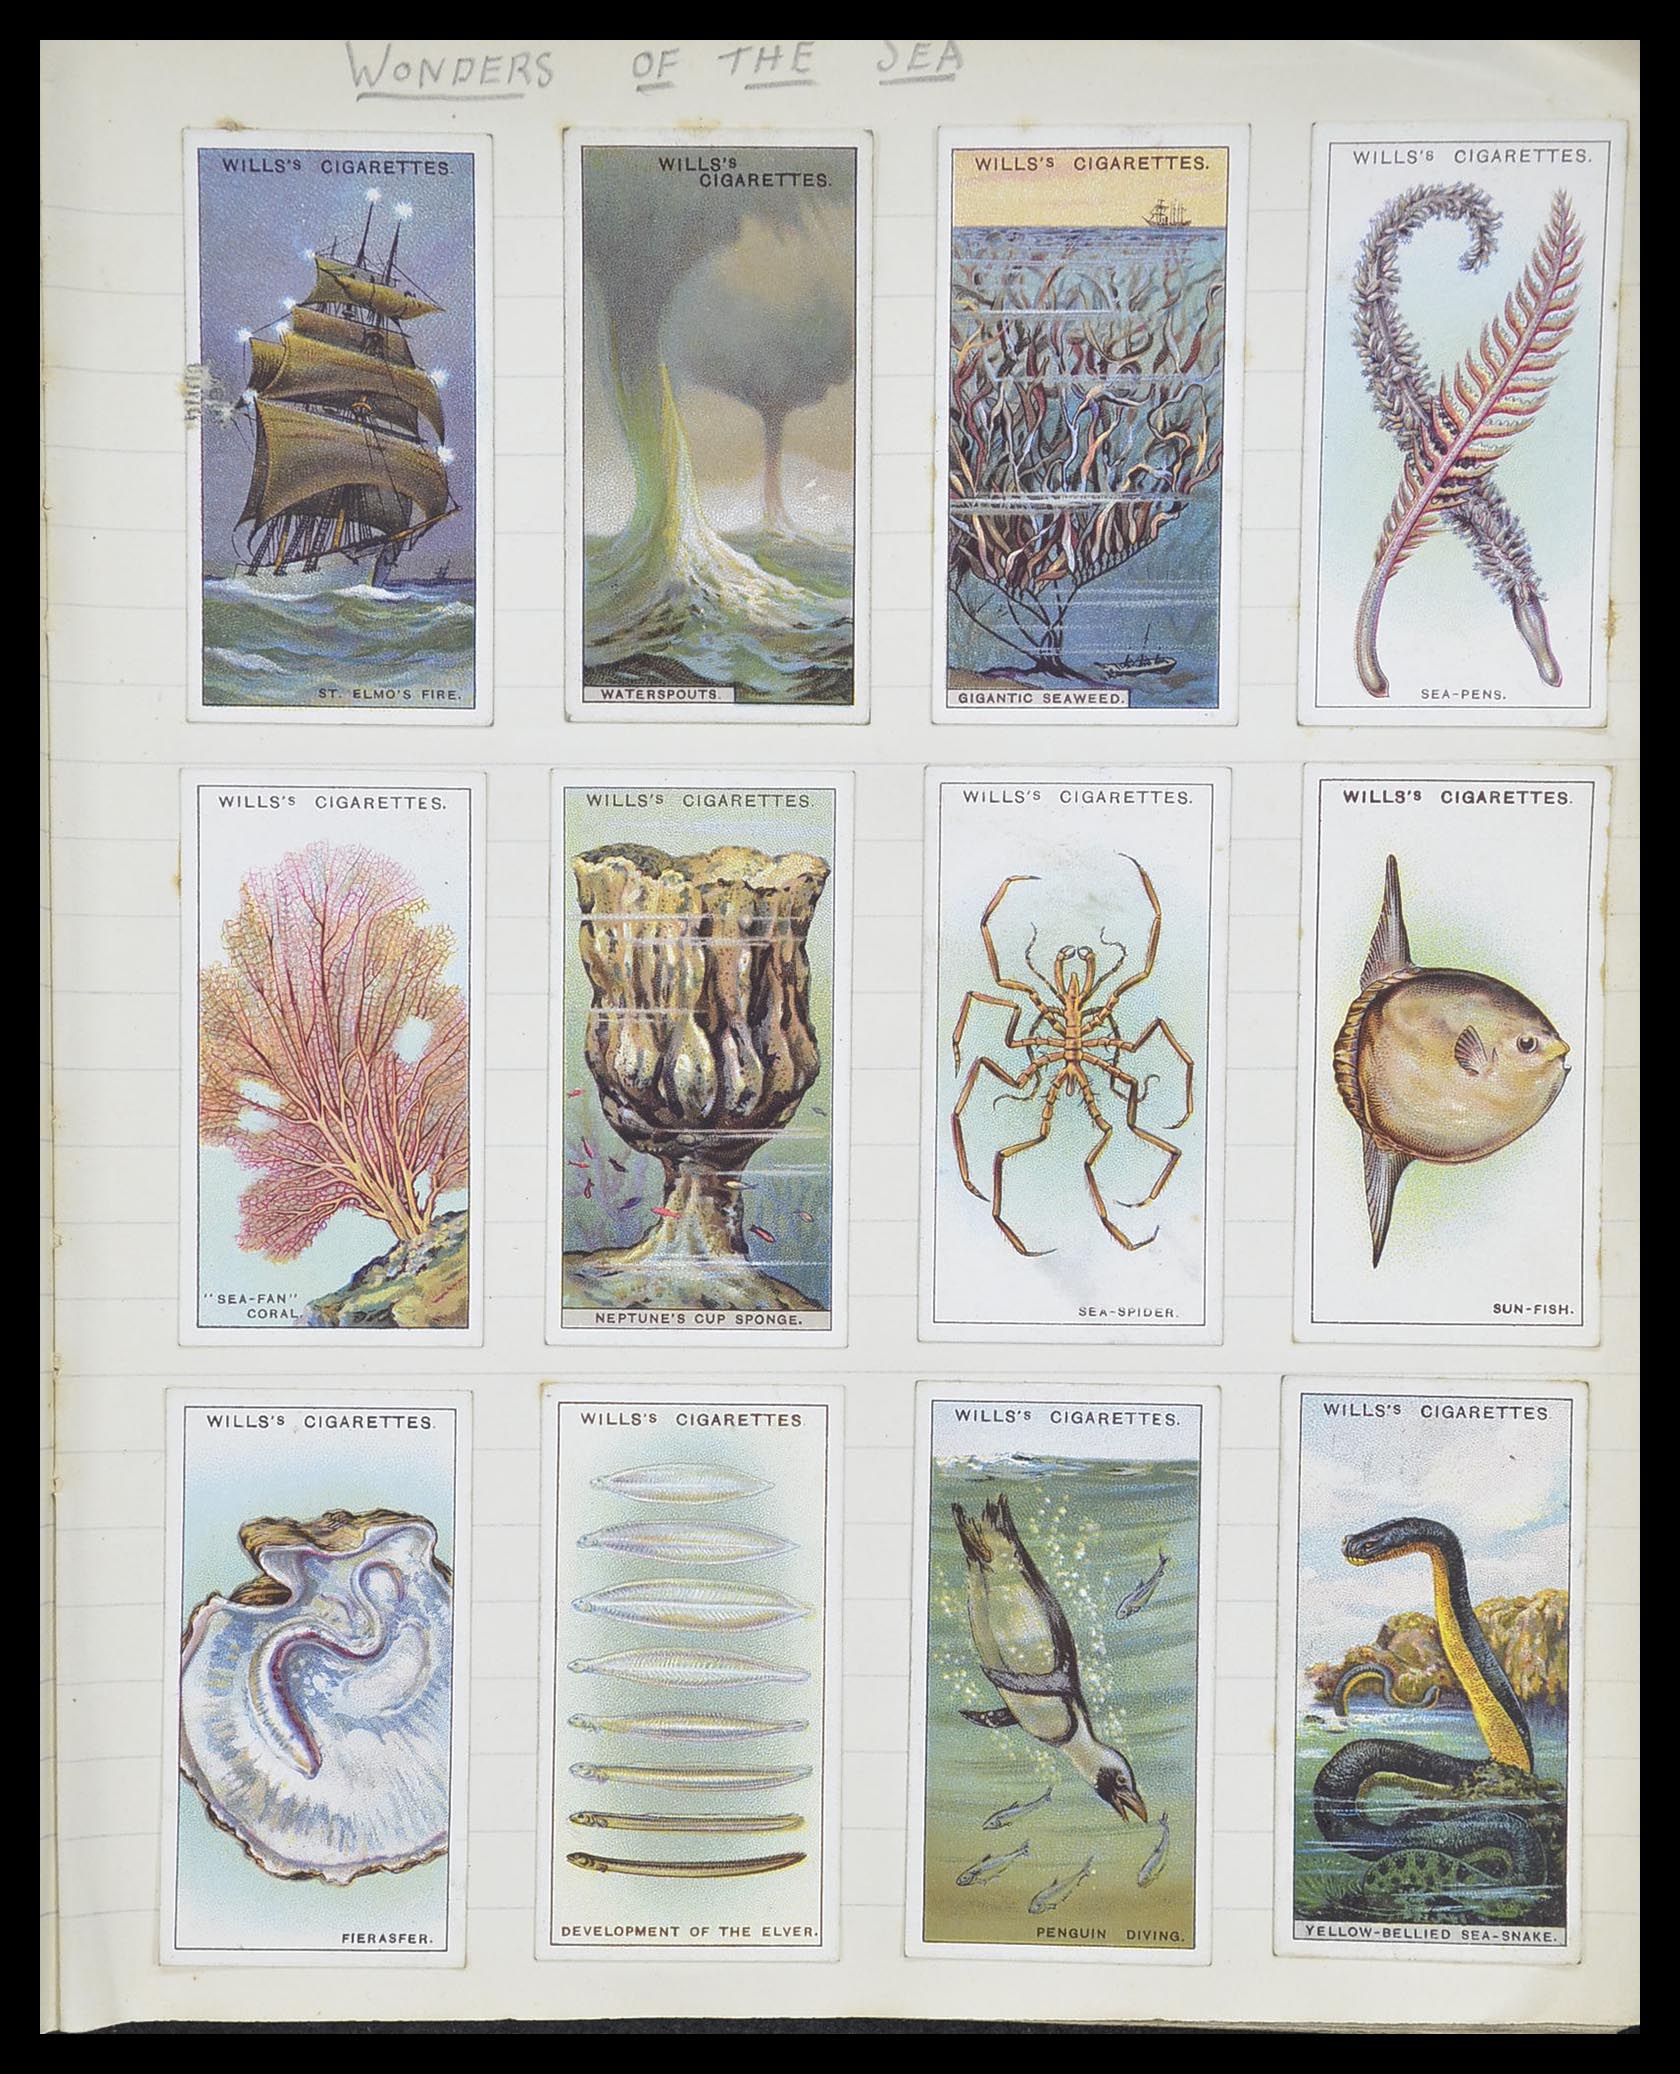 33444 091 - Stamp collection 33444 Great Britain cigarette cards.